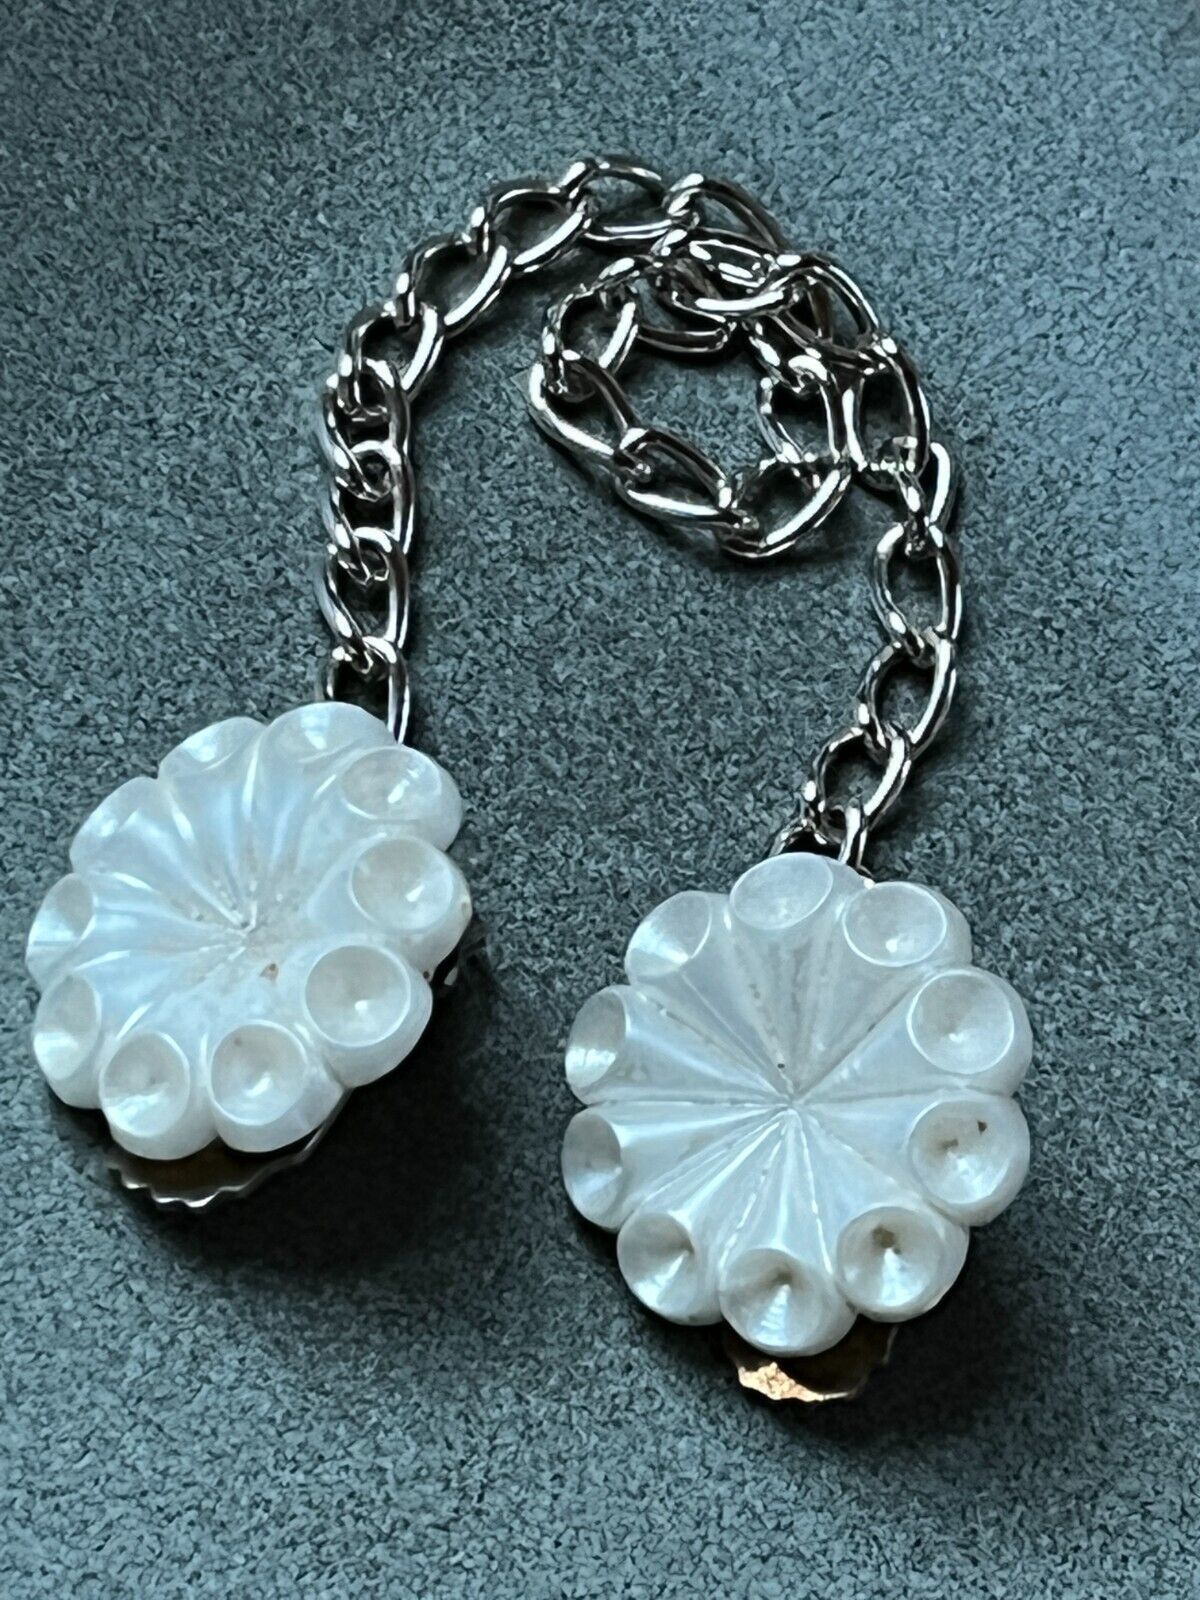 Primary image for Vintage Pearly White Plastic Flower w Lightweight Chain Collar Clip or Other Use